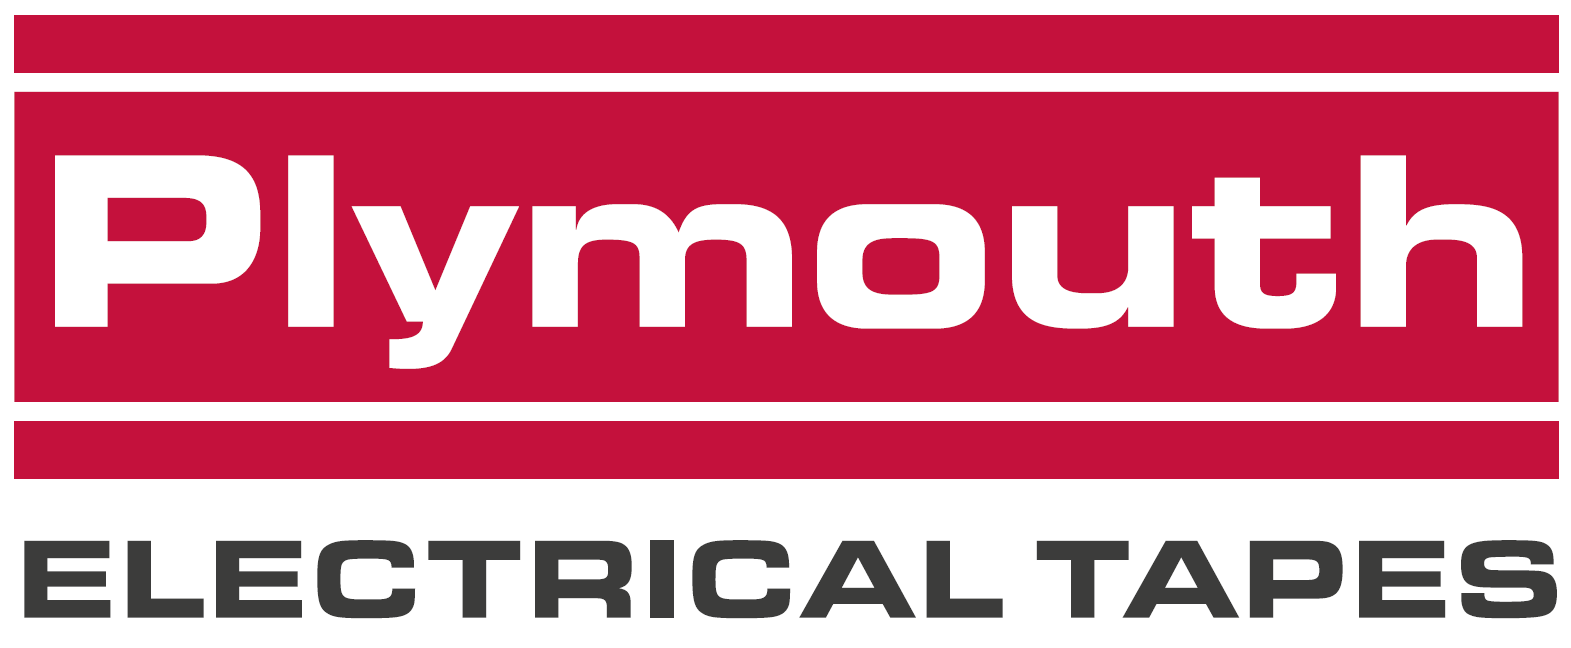 Plymouth Rubber Group